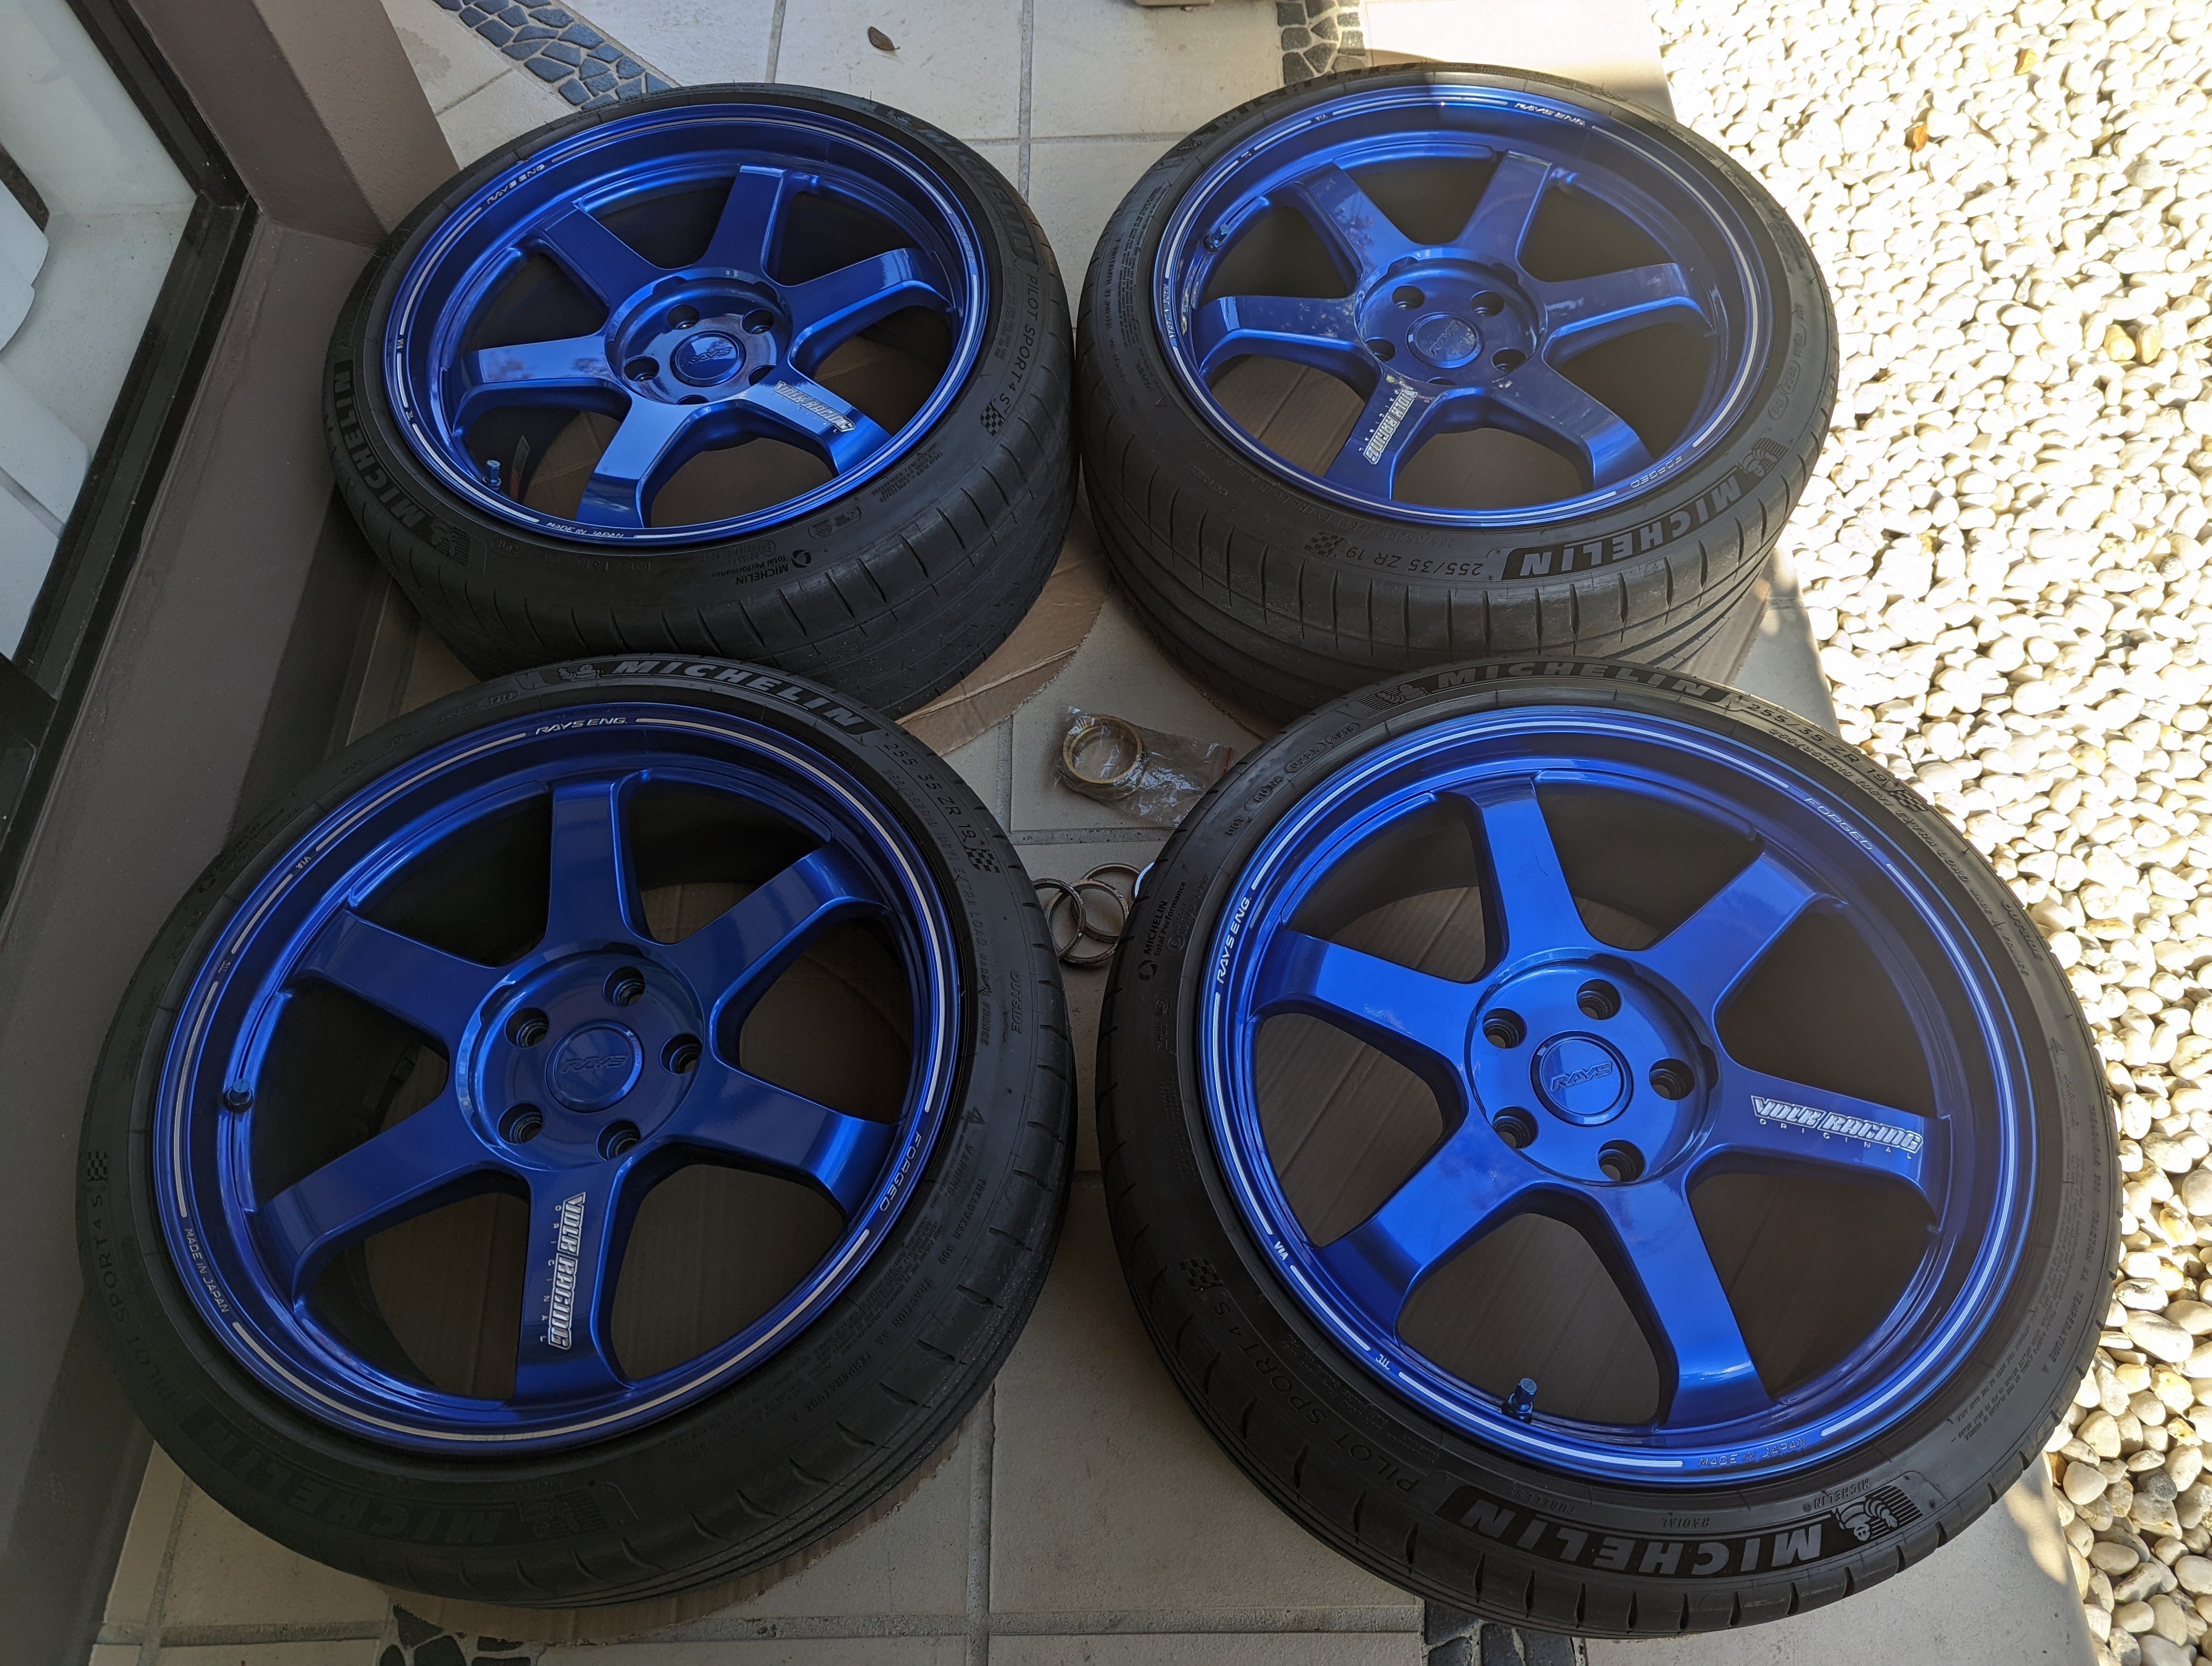 TE37 Ultra M Spec (Hyper Blue) with Genuine Rays Center Caps and Michelin Pilot Sport 4S - 5x120 - 19x9.5 +36 (255/35/19)